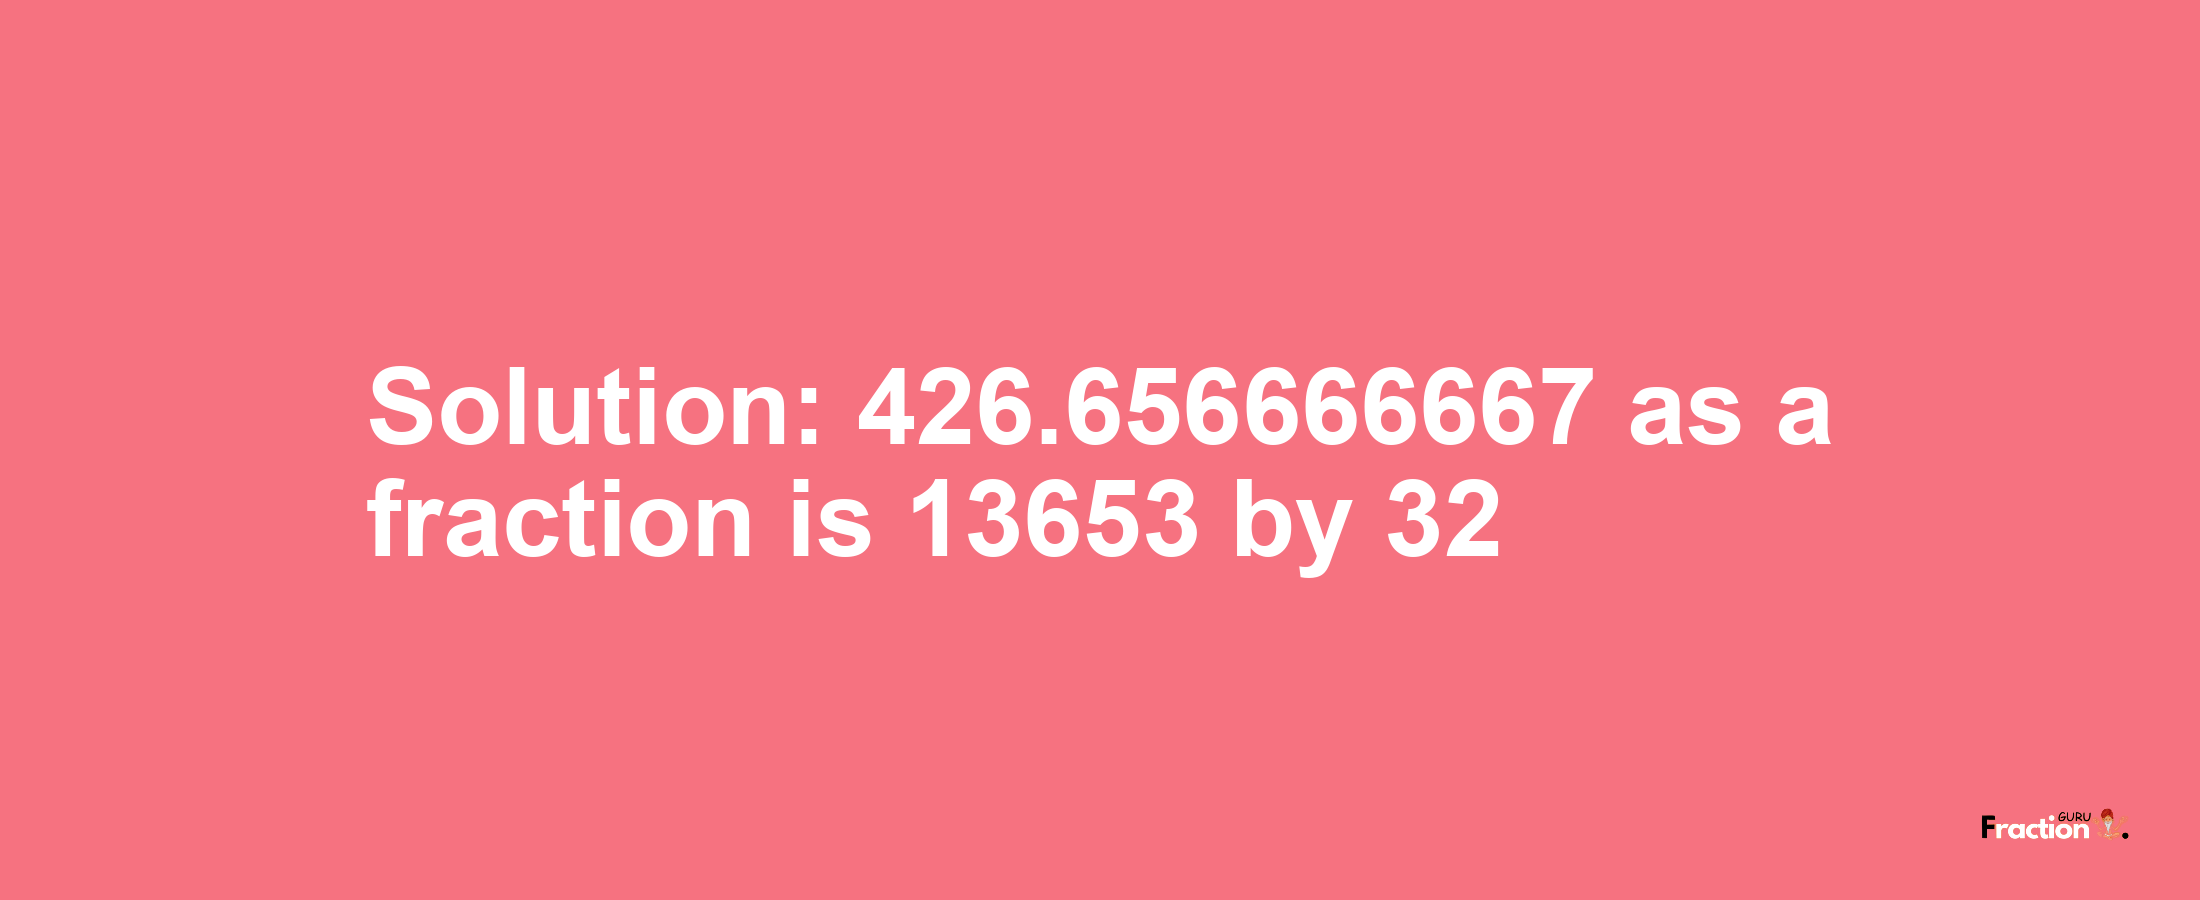 Solution:426.656666667 as a fraction is 13653/32